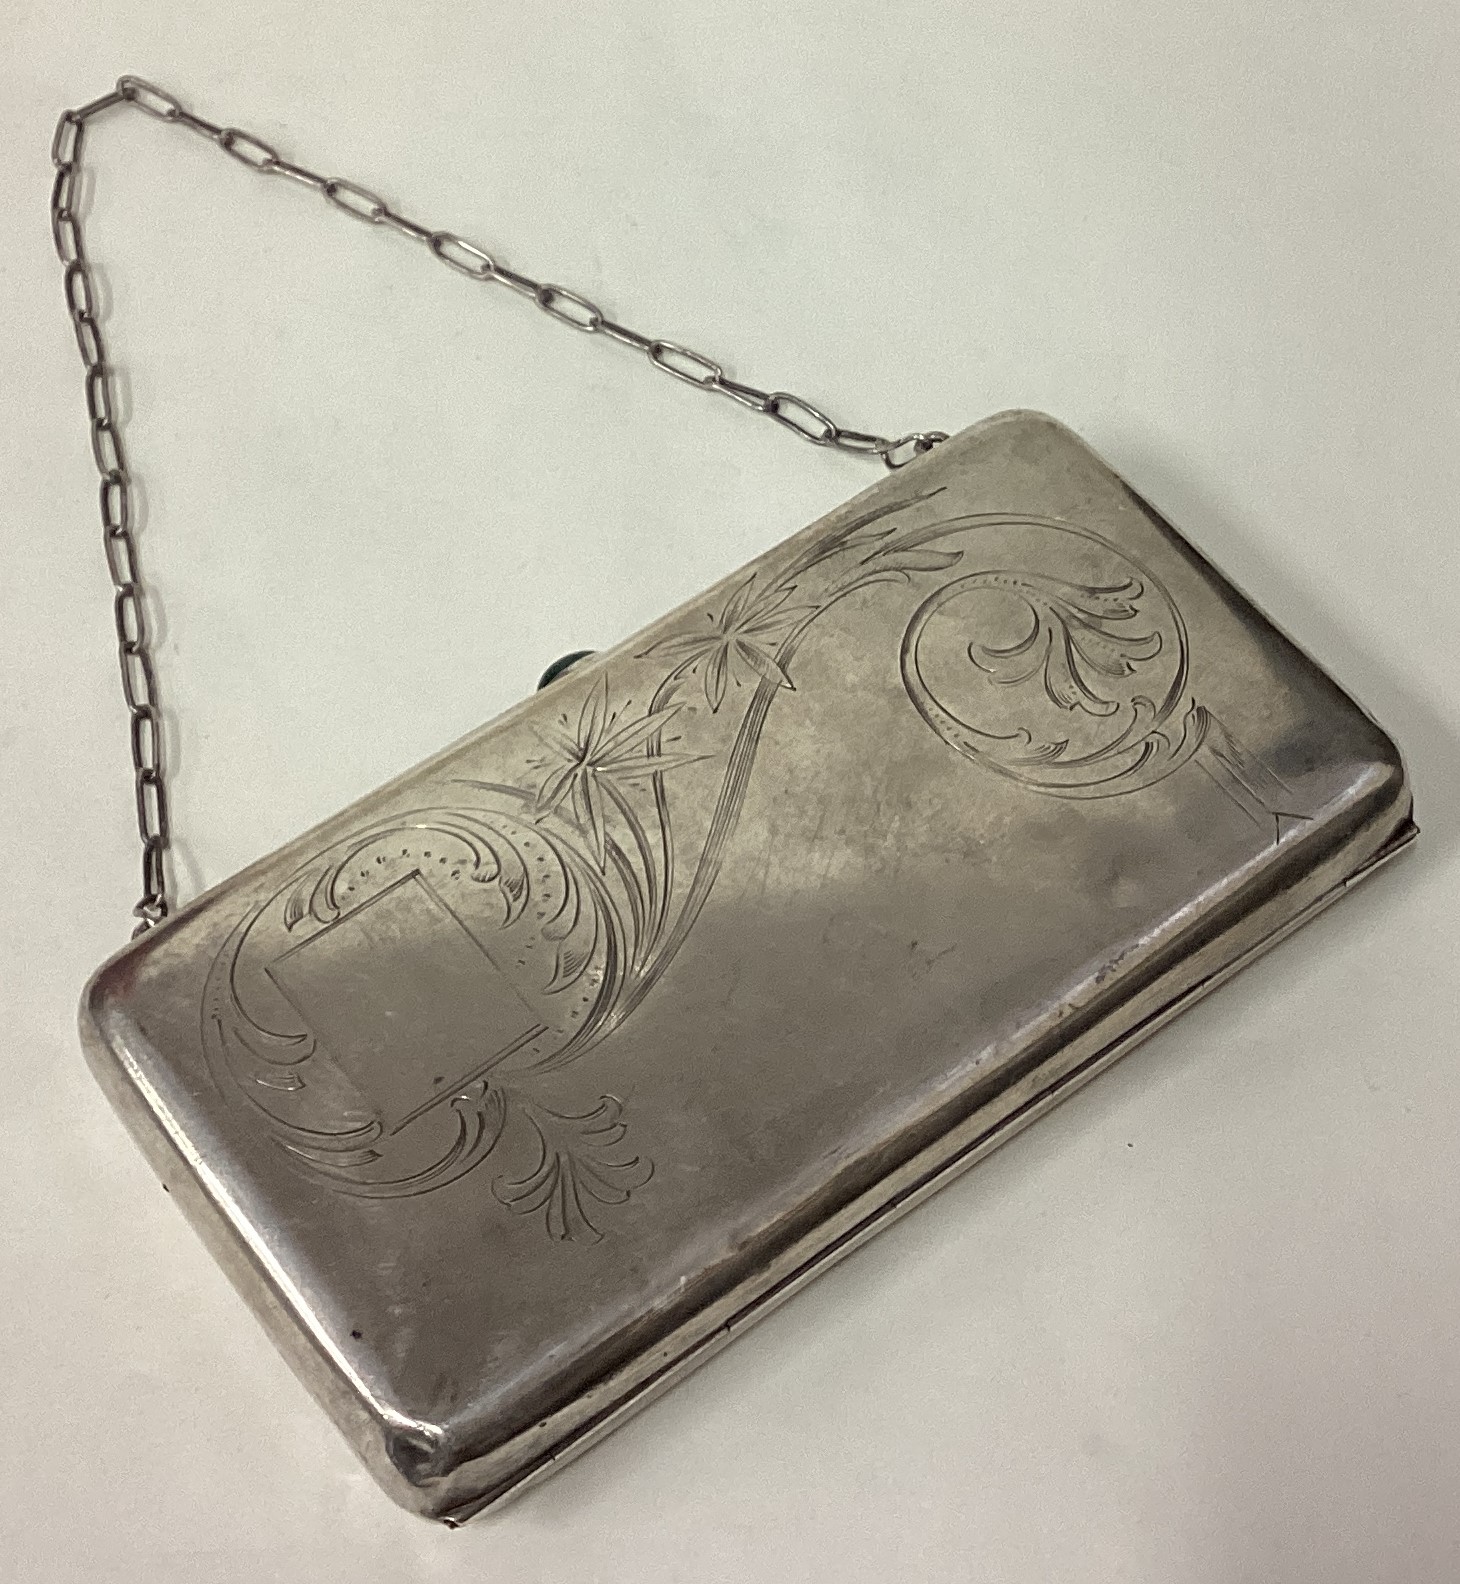 A large Russian silver purse with green stone and engraved decoration.